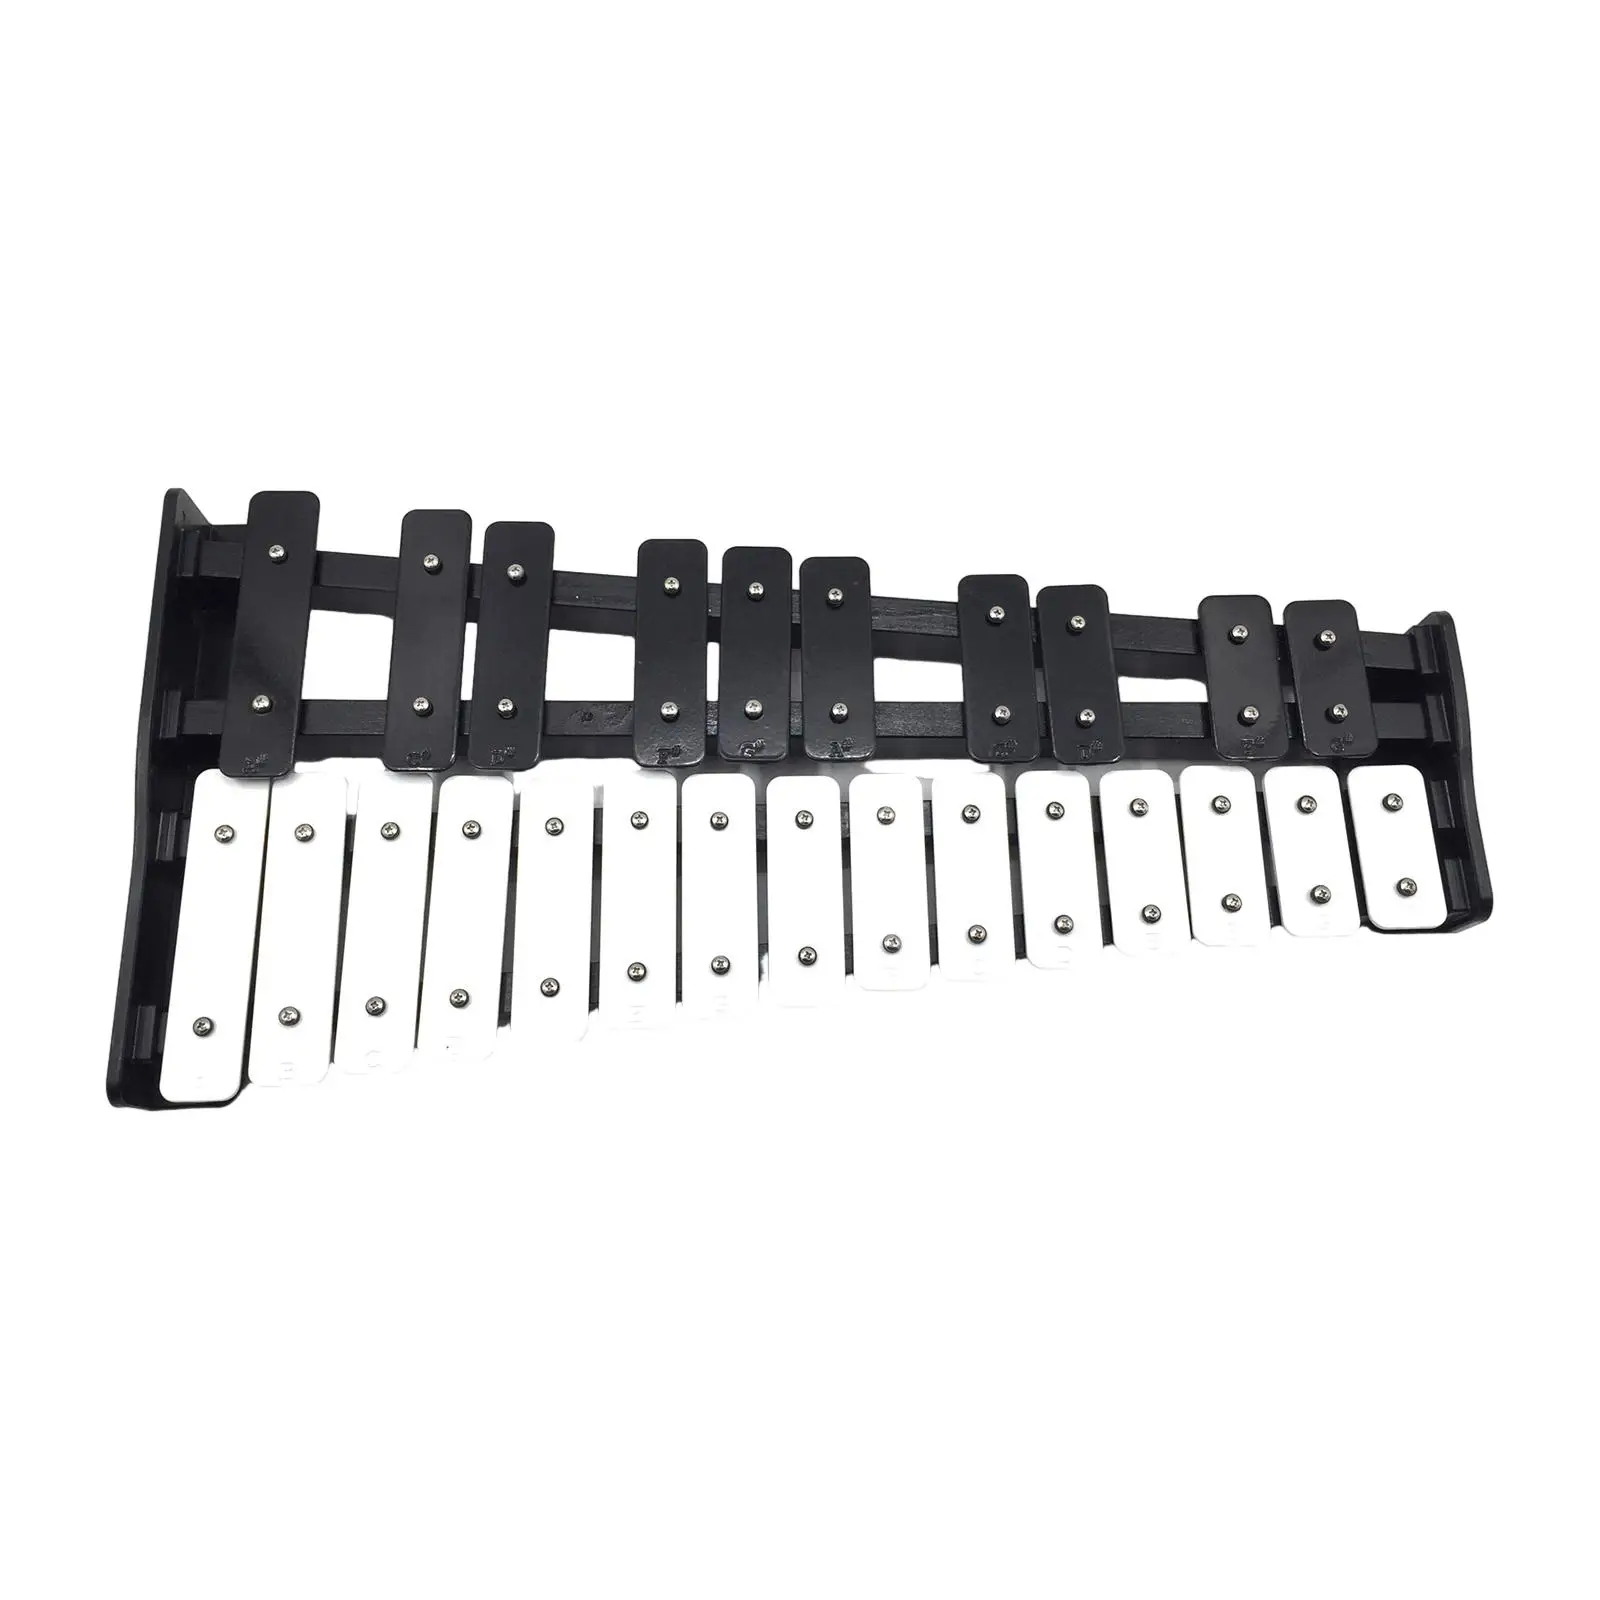 Xylophone for Beginners Compact Professional 25 Key Glockenspiel